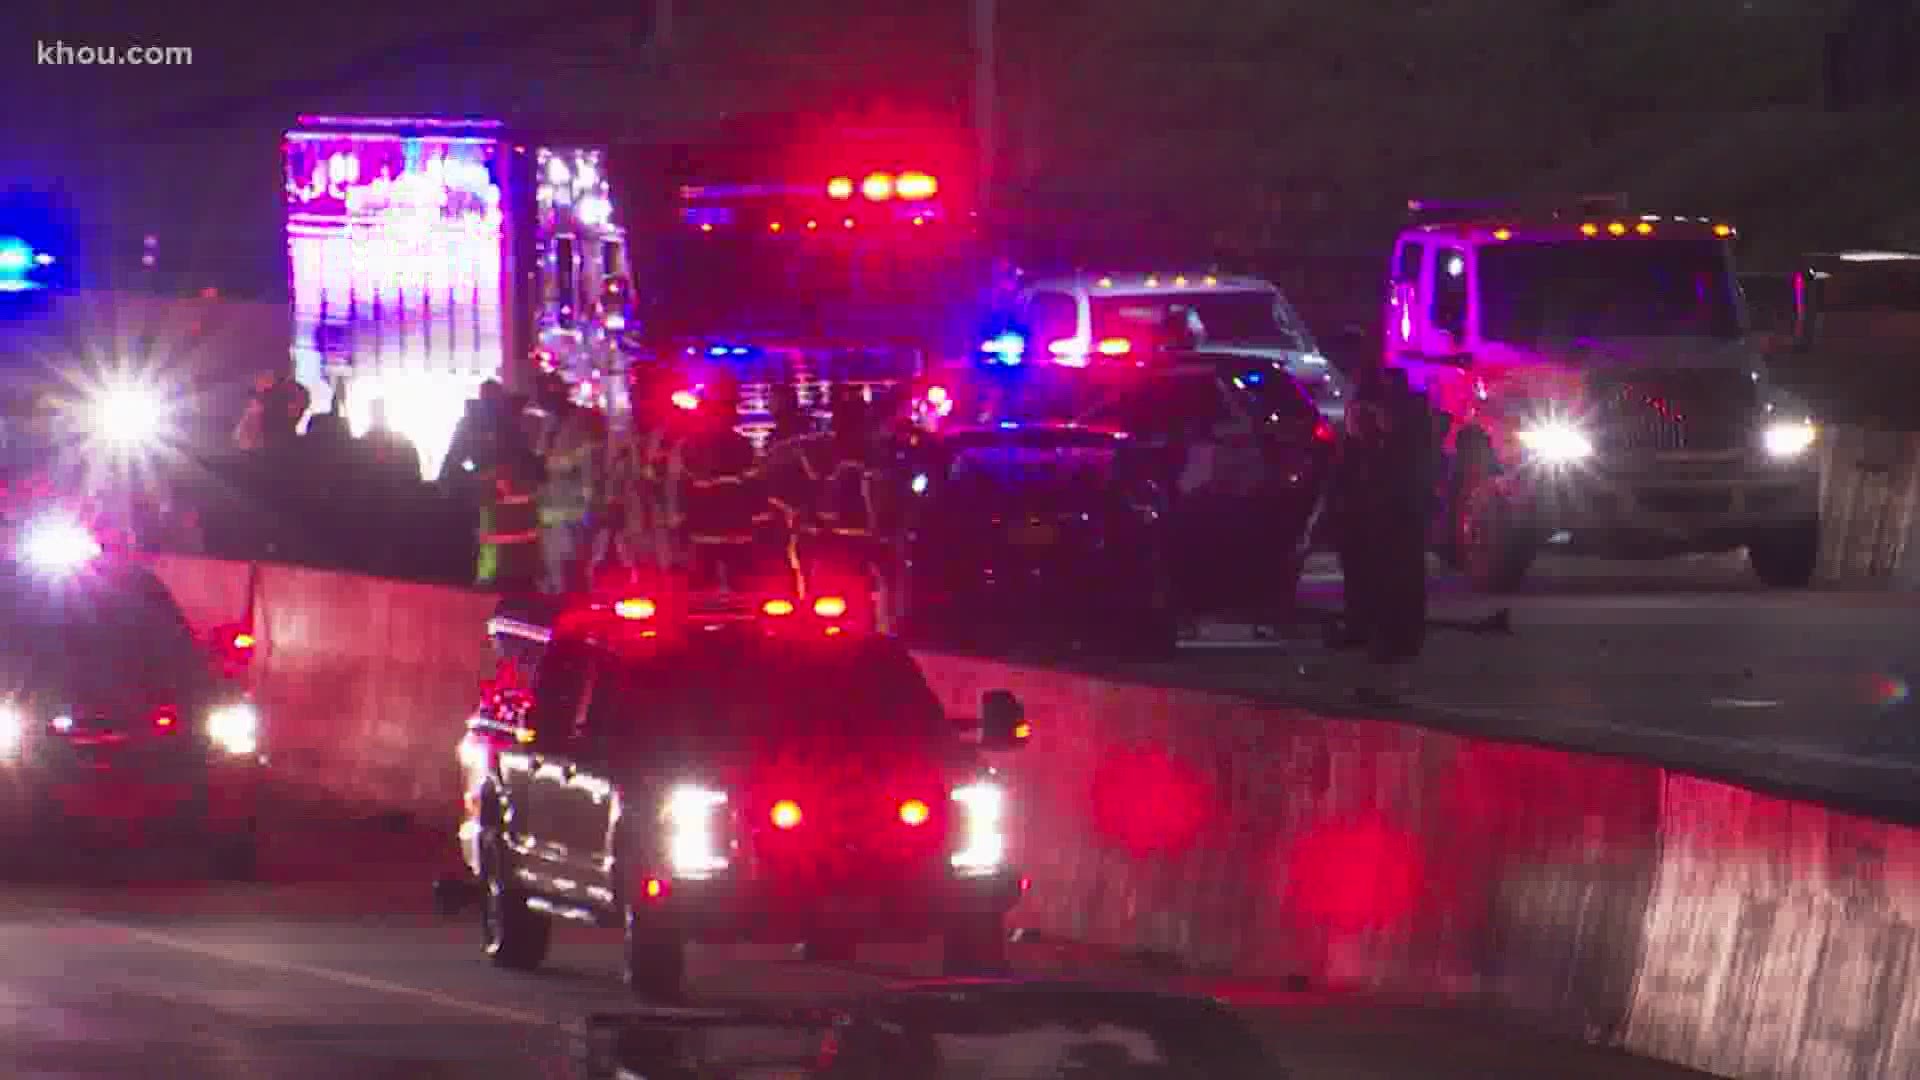 KHOU 11's Janel Forte reports from Houston's south side on a double fatal crash Dec. 23, 2020